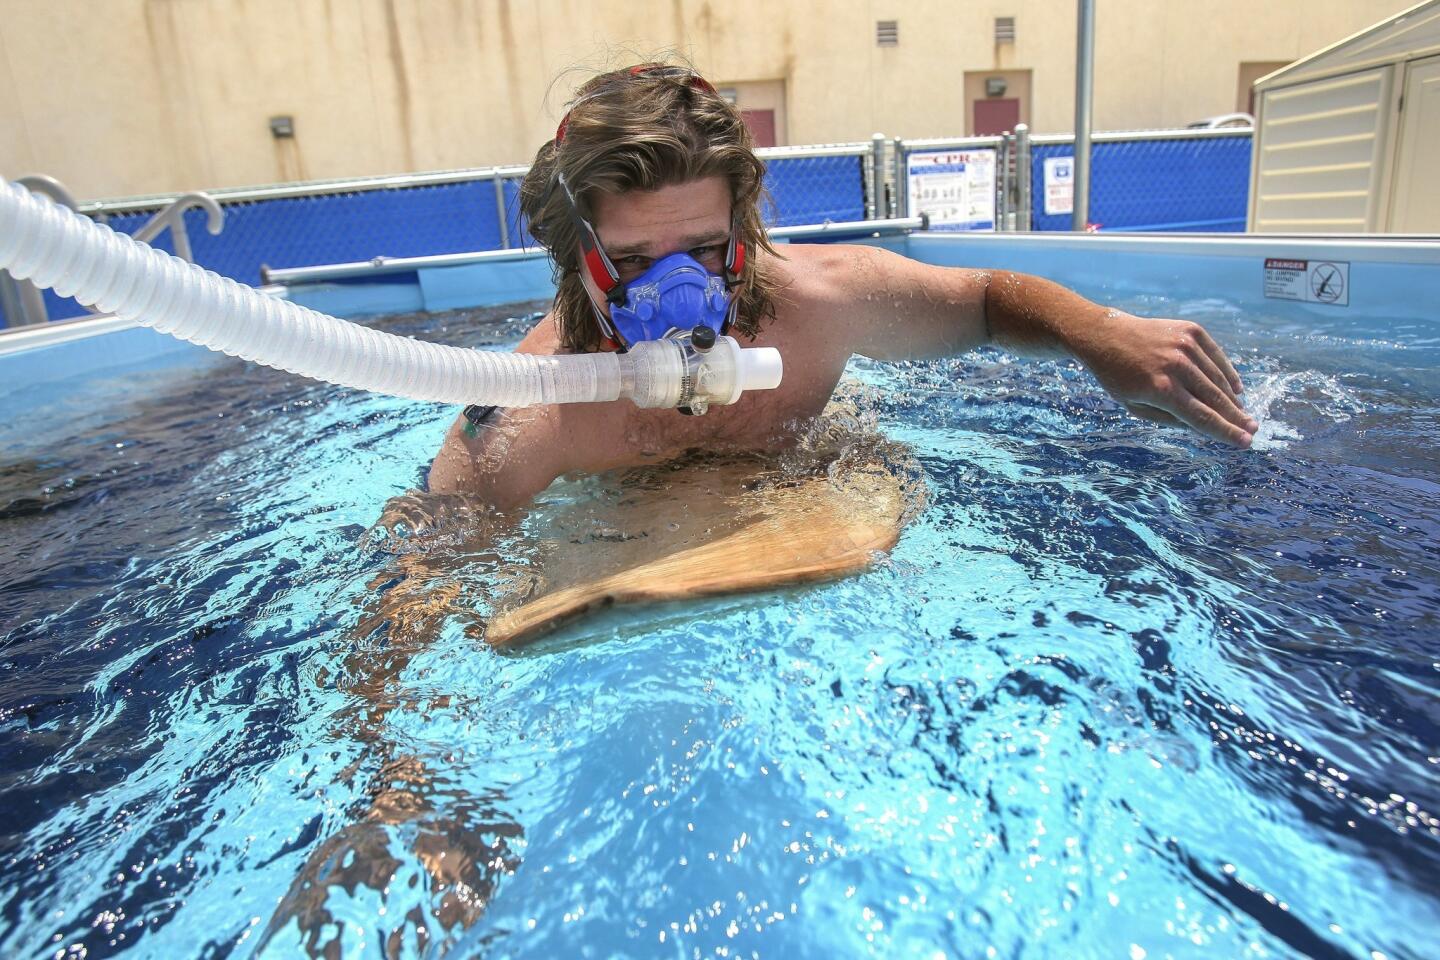 Kinesiology student Cody Cuchna, 24, paddles a surfboard while wearing a mask, to measure oxygen consumption, as he and other students demonstrate collecting physical measurements while paddling a surfboard in a swim flume.